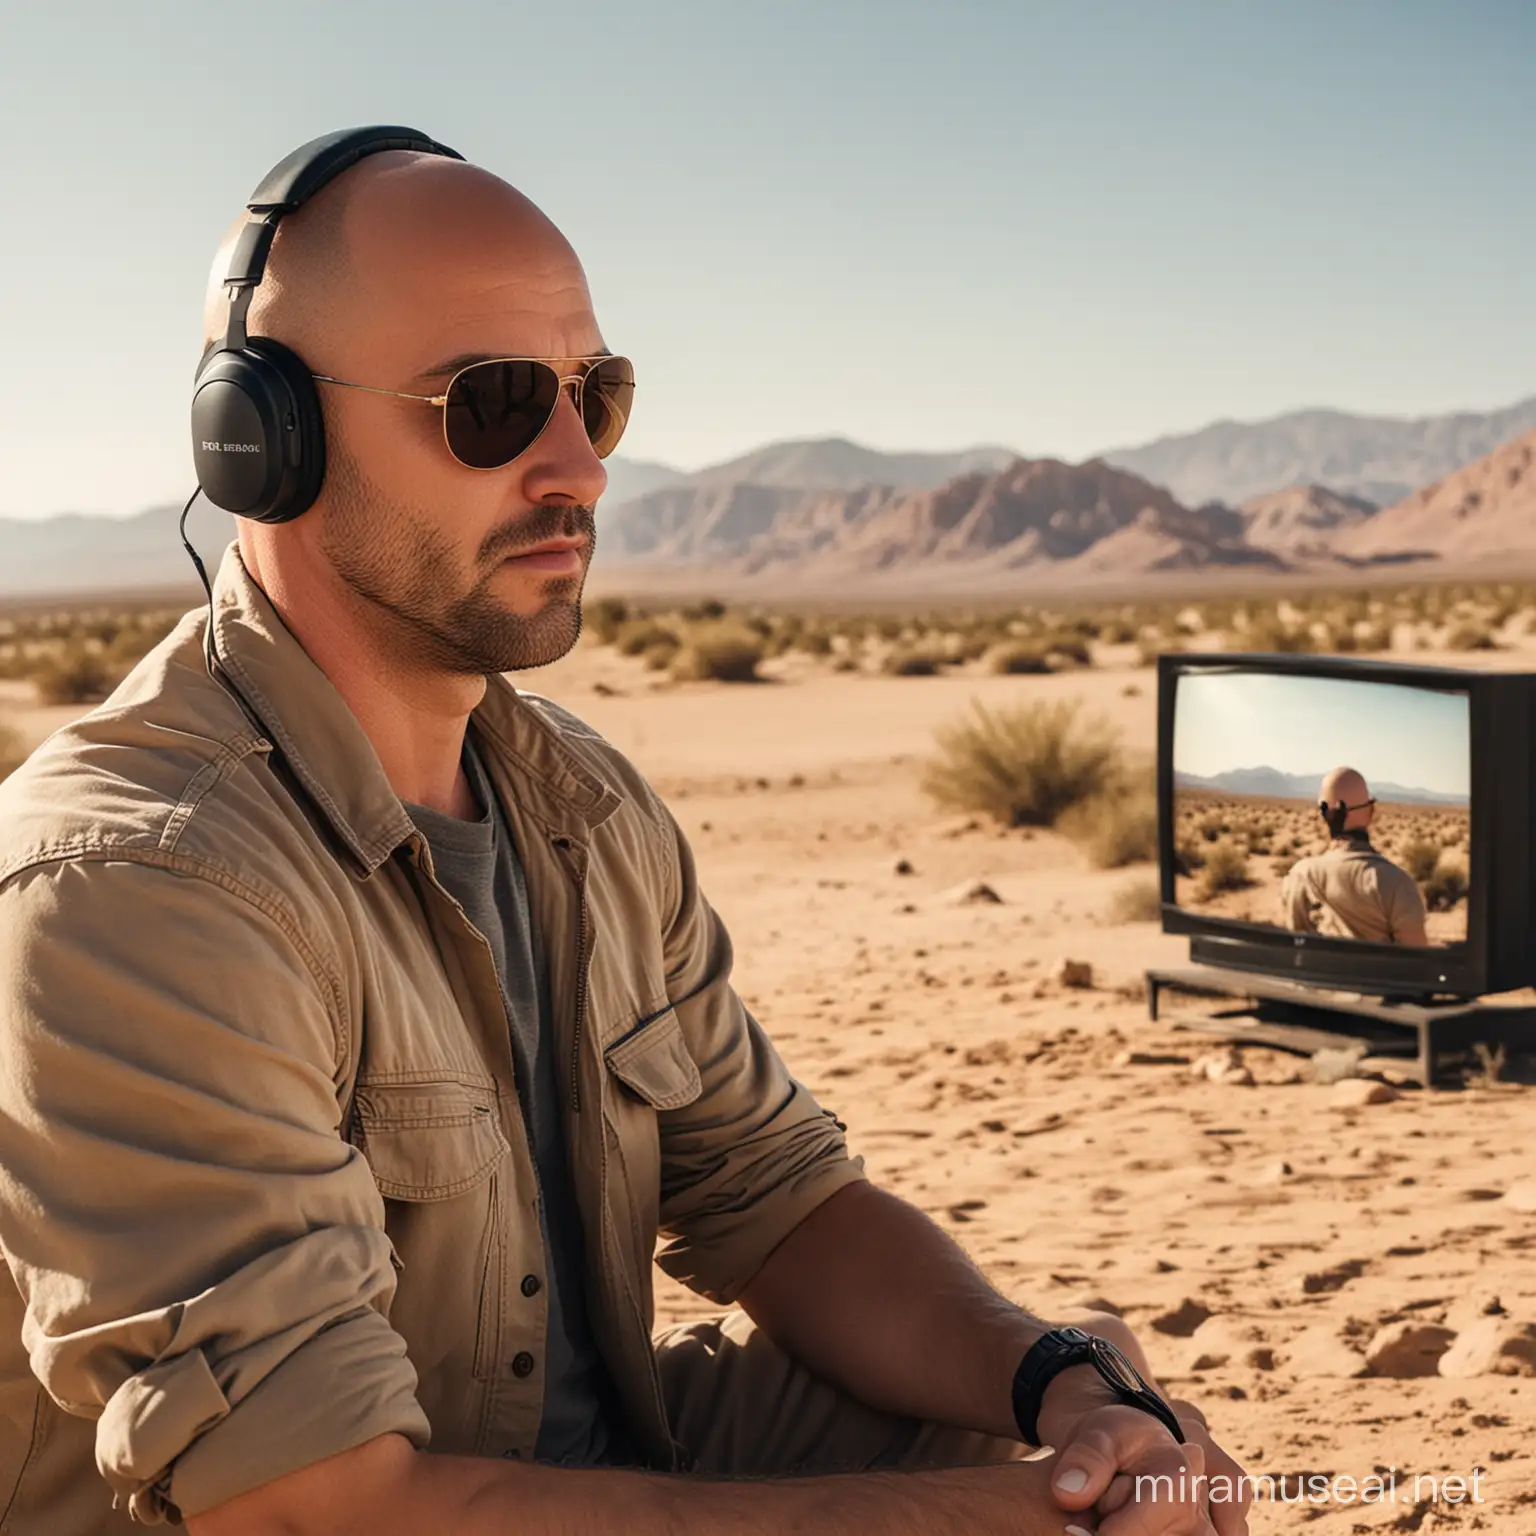 bald man with aviators and a headset watches TV in the desert
